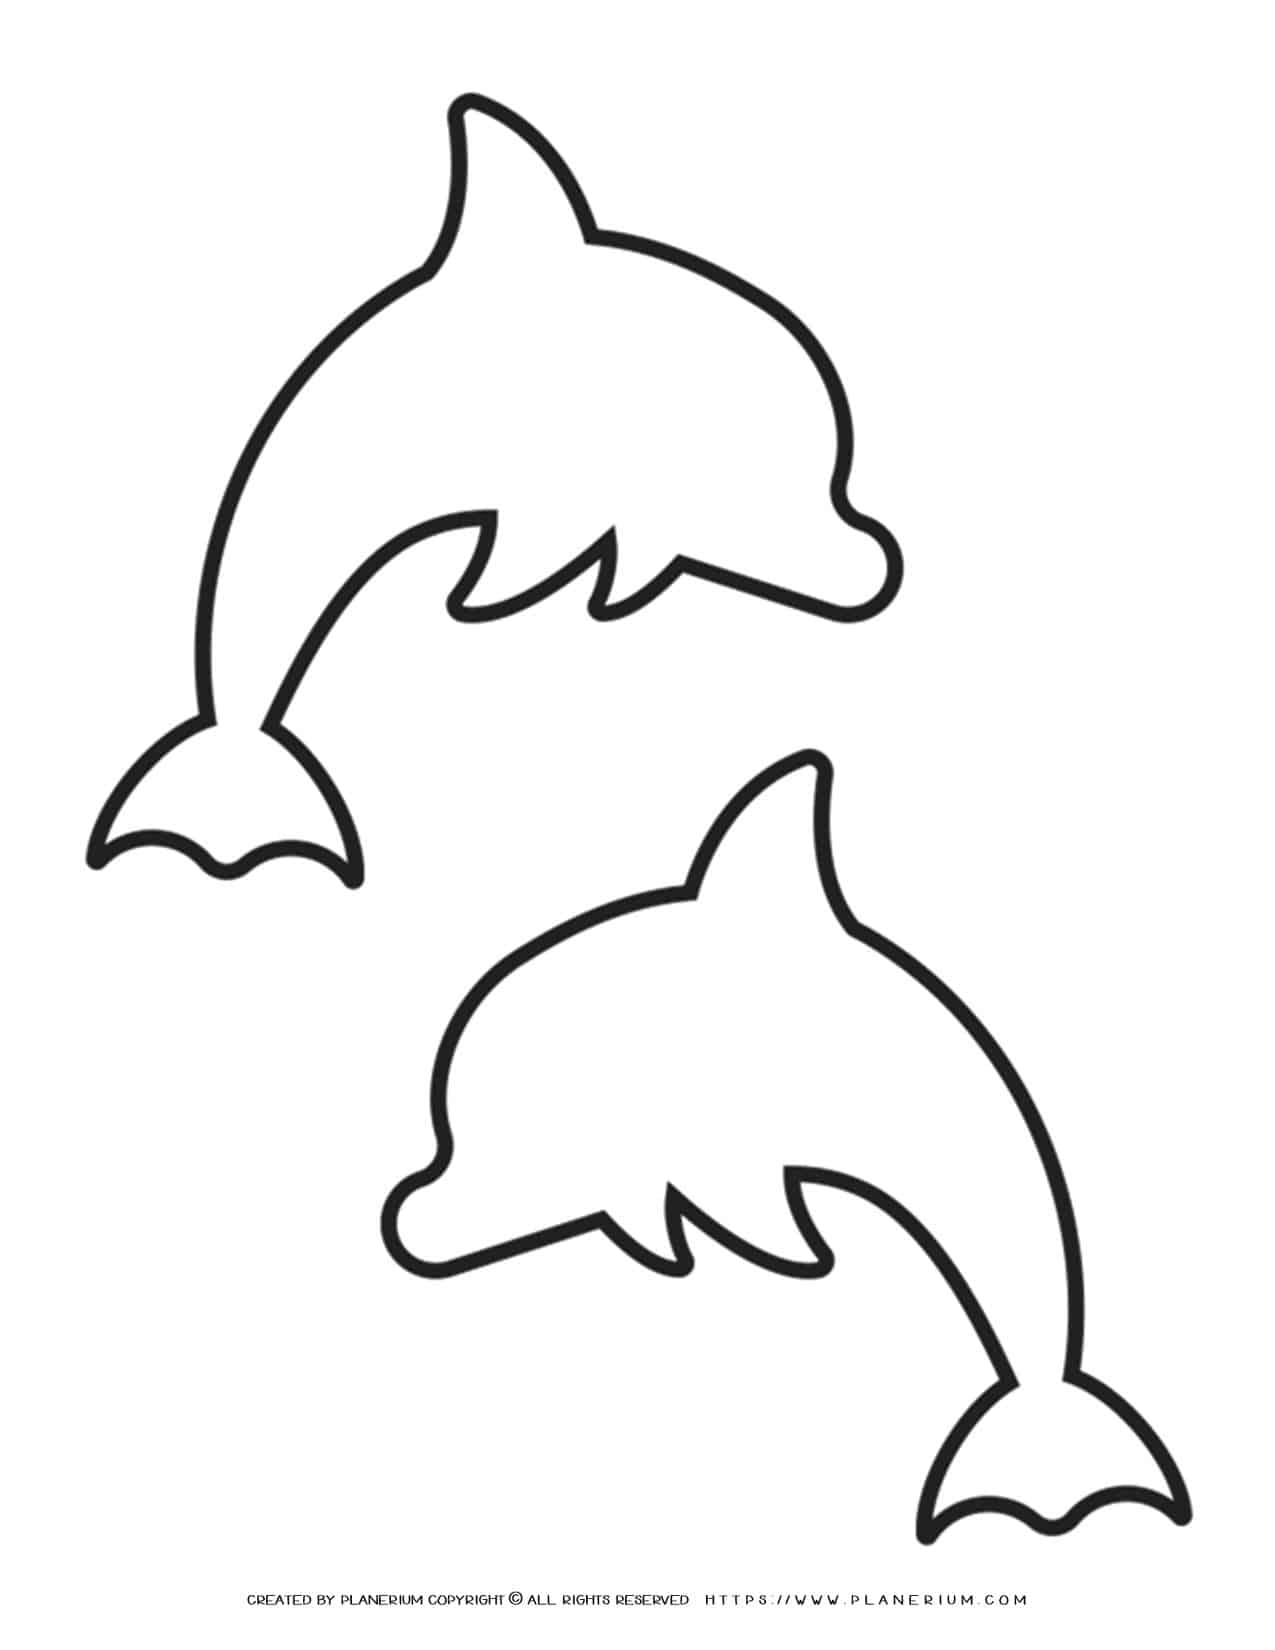 Two Dolphins Template | Planerium